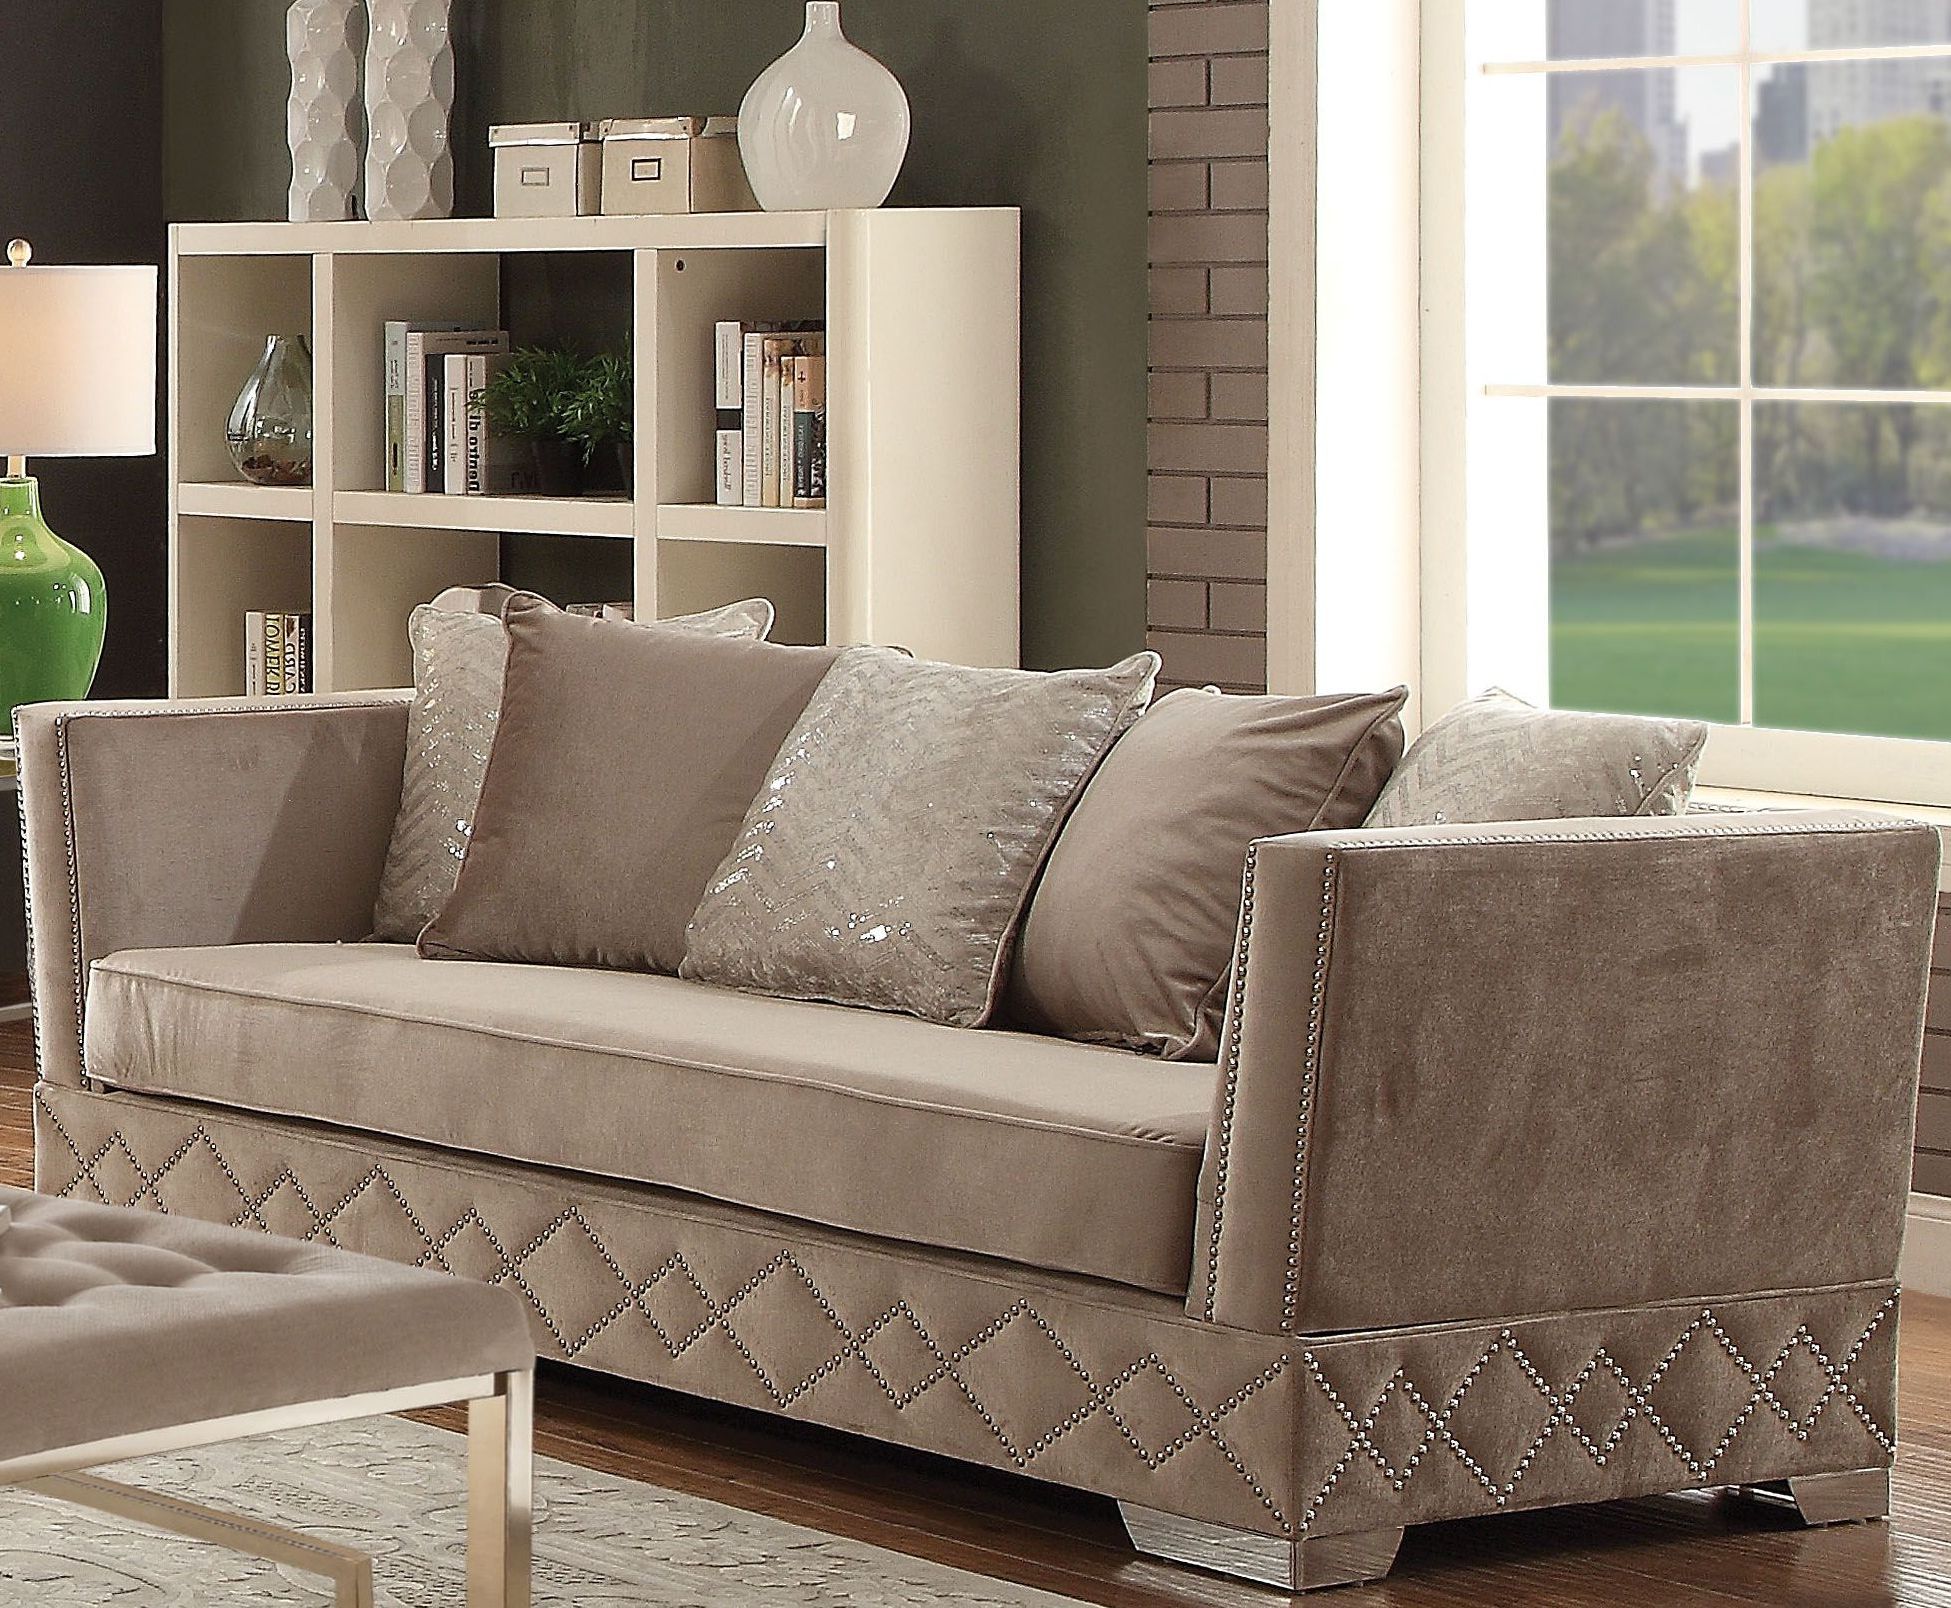 Best And Newest Elegant Beige Velvet Sofas With Regard To Acme Tamara Beige Velvet Sofa – Tamara Collection: 8 Reviews (View 7 of 15)